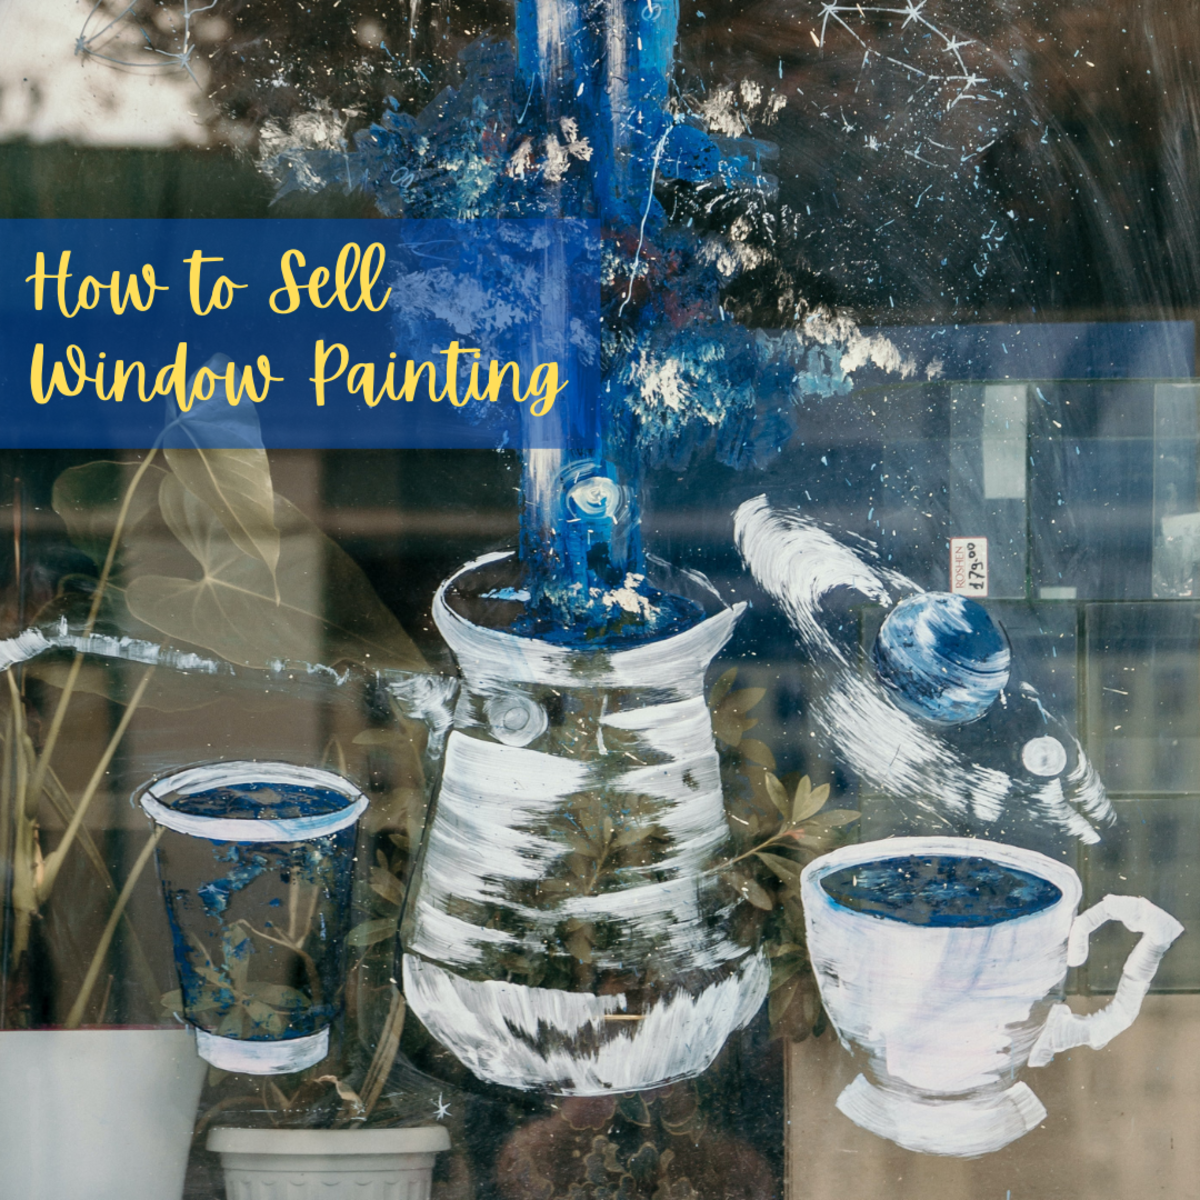 So, You Want to Sell Window Painting?